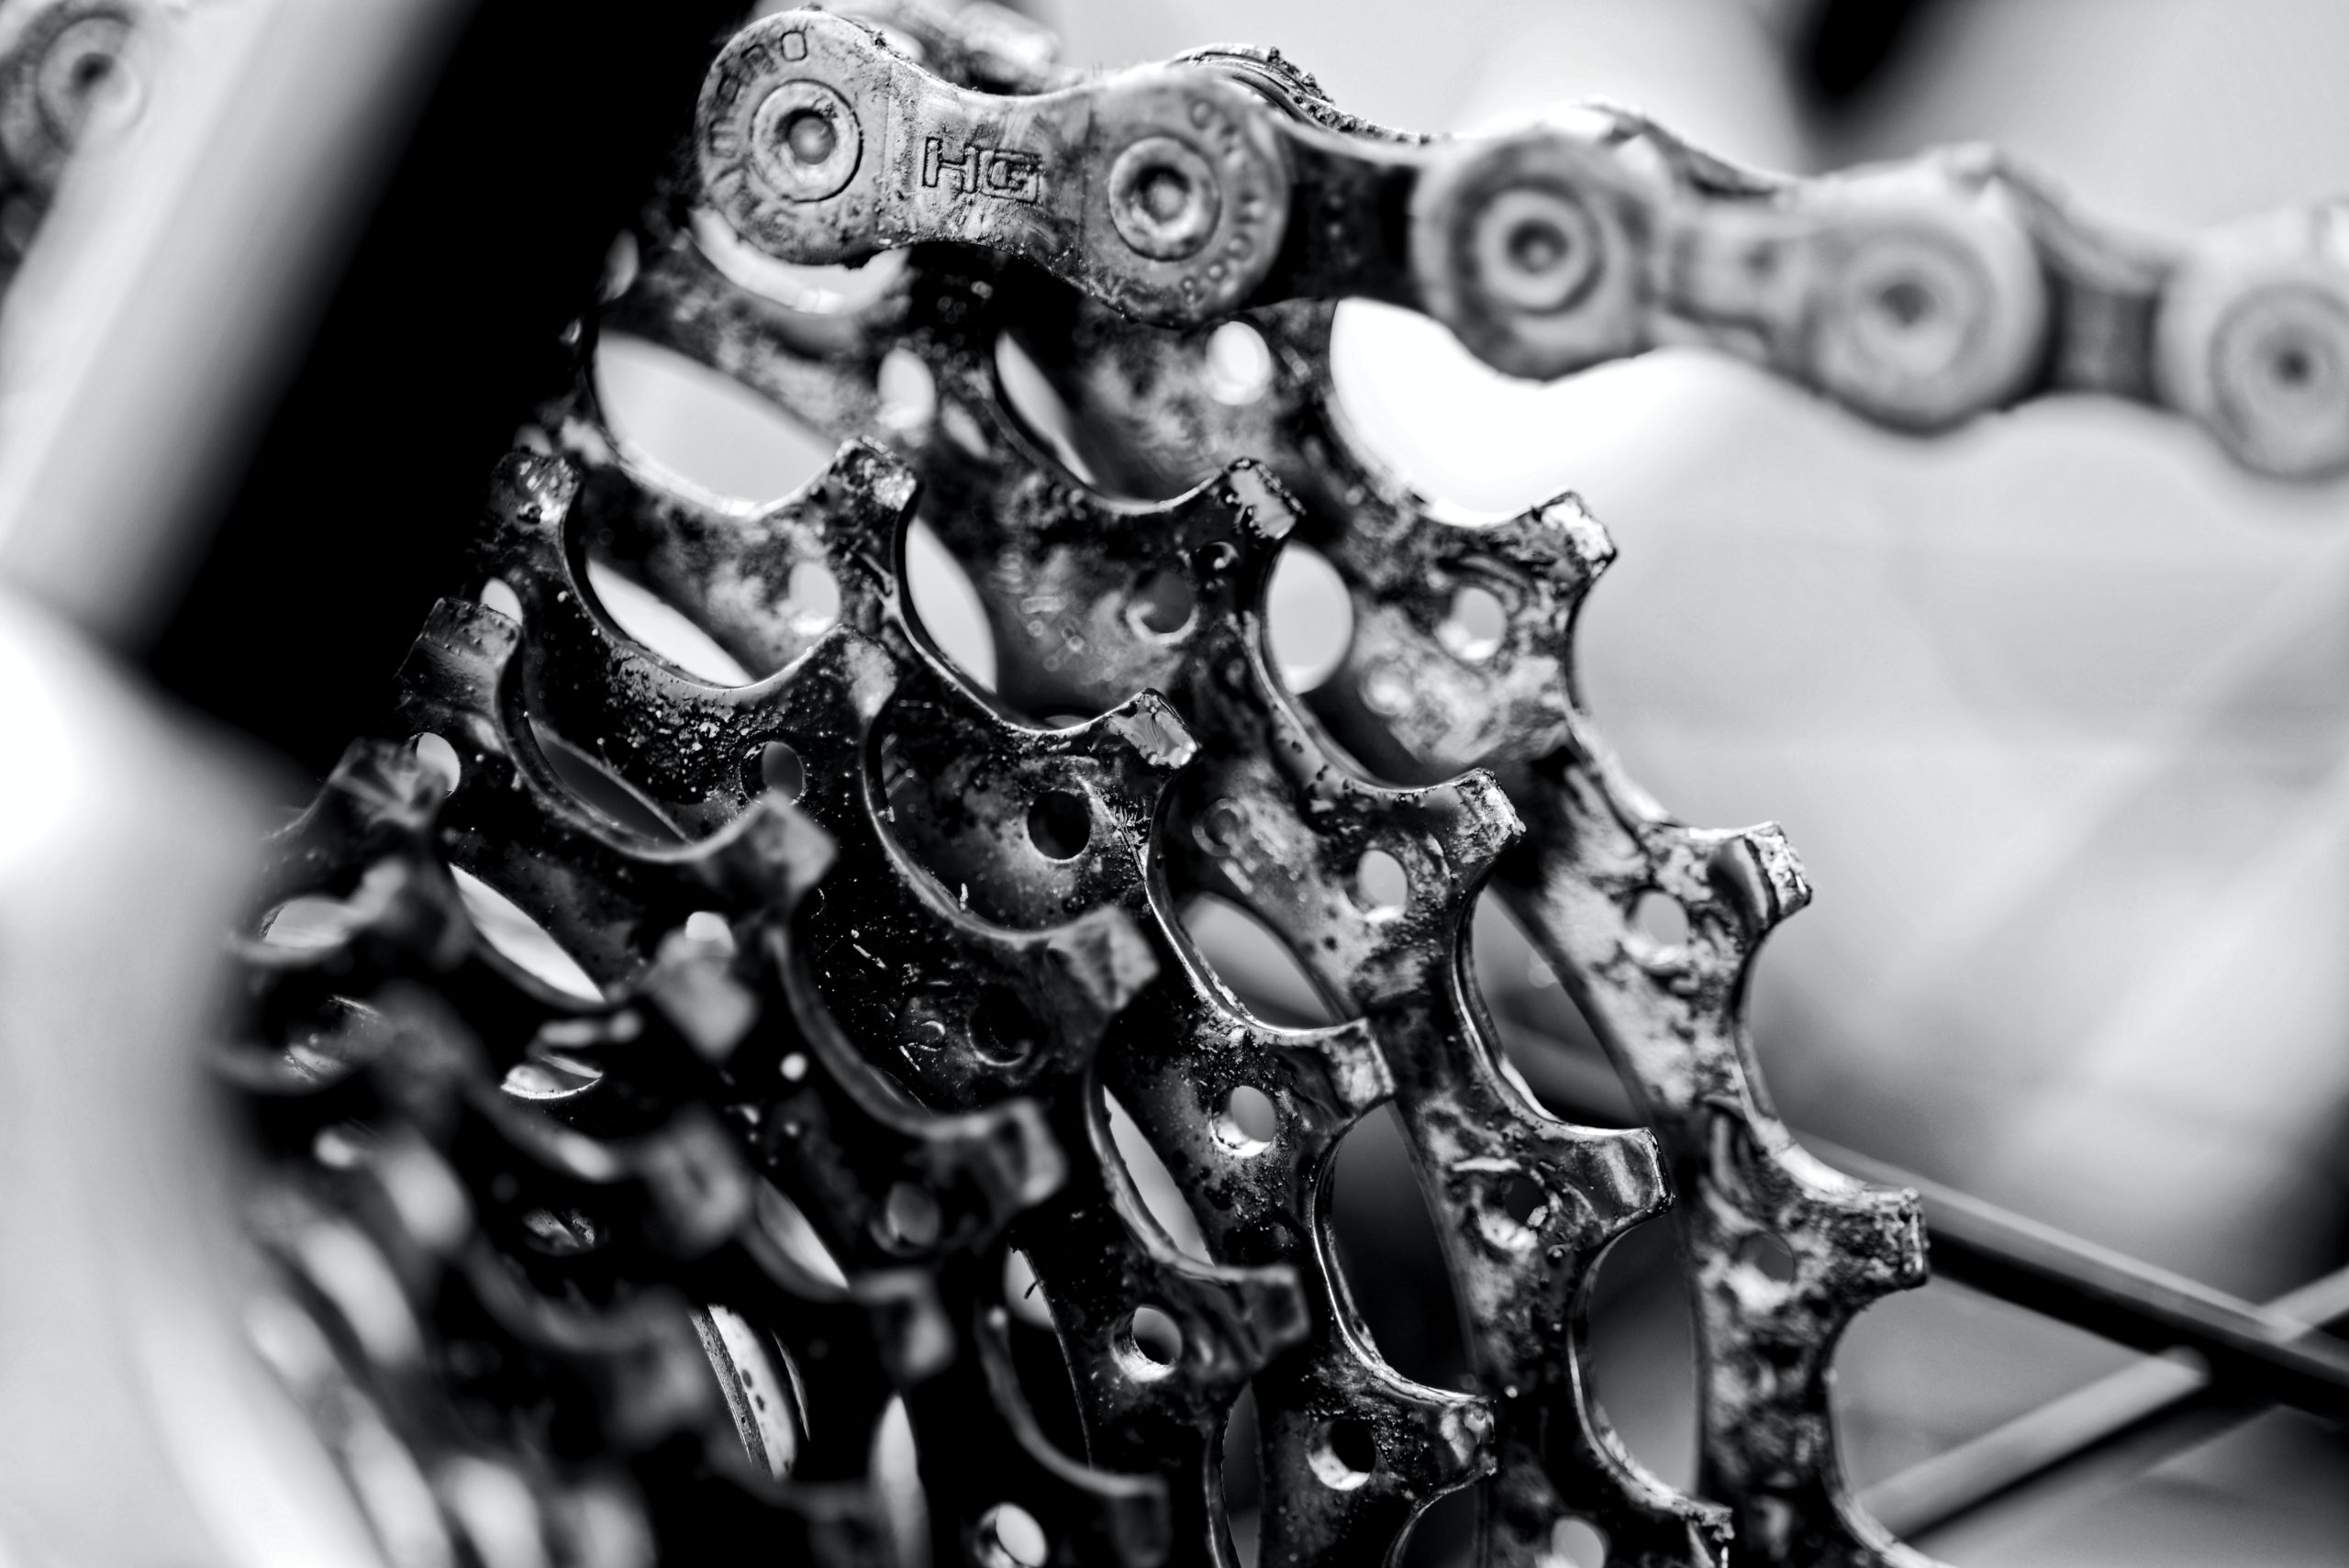 How to clean and lube your bike chain